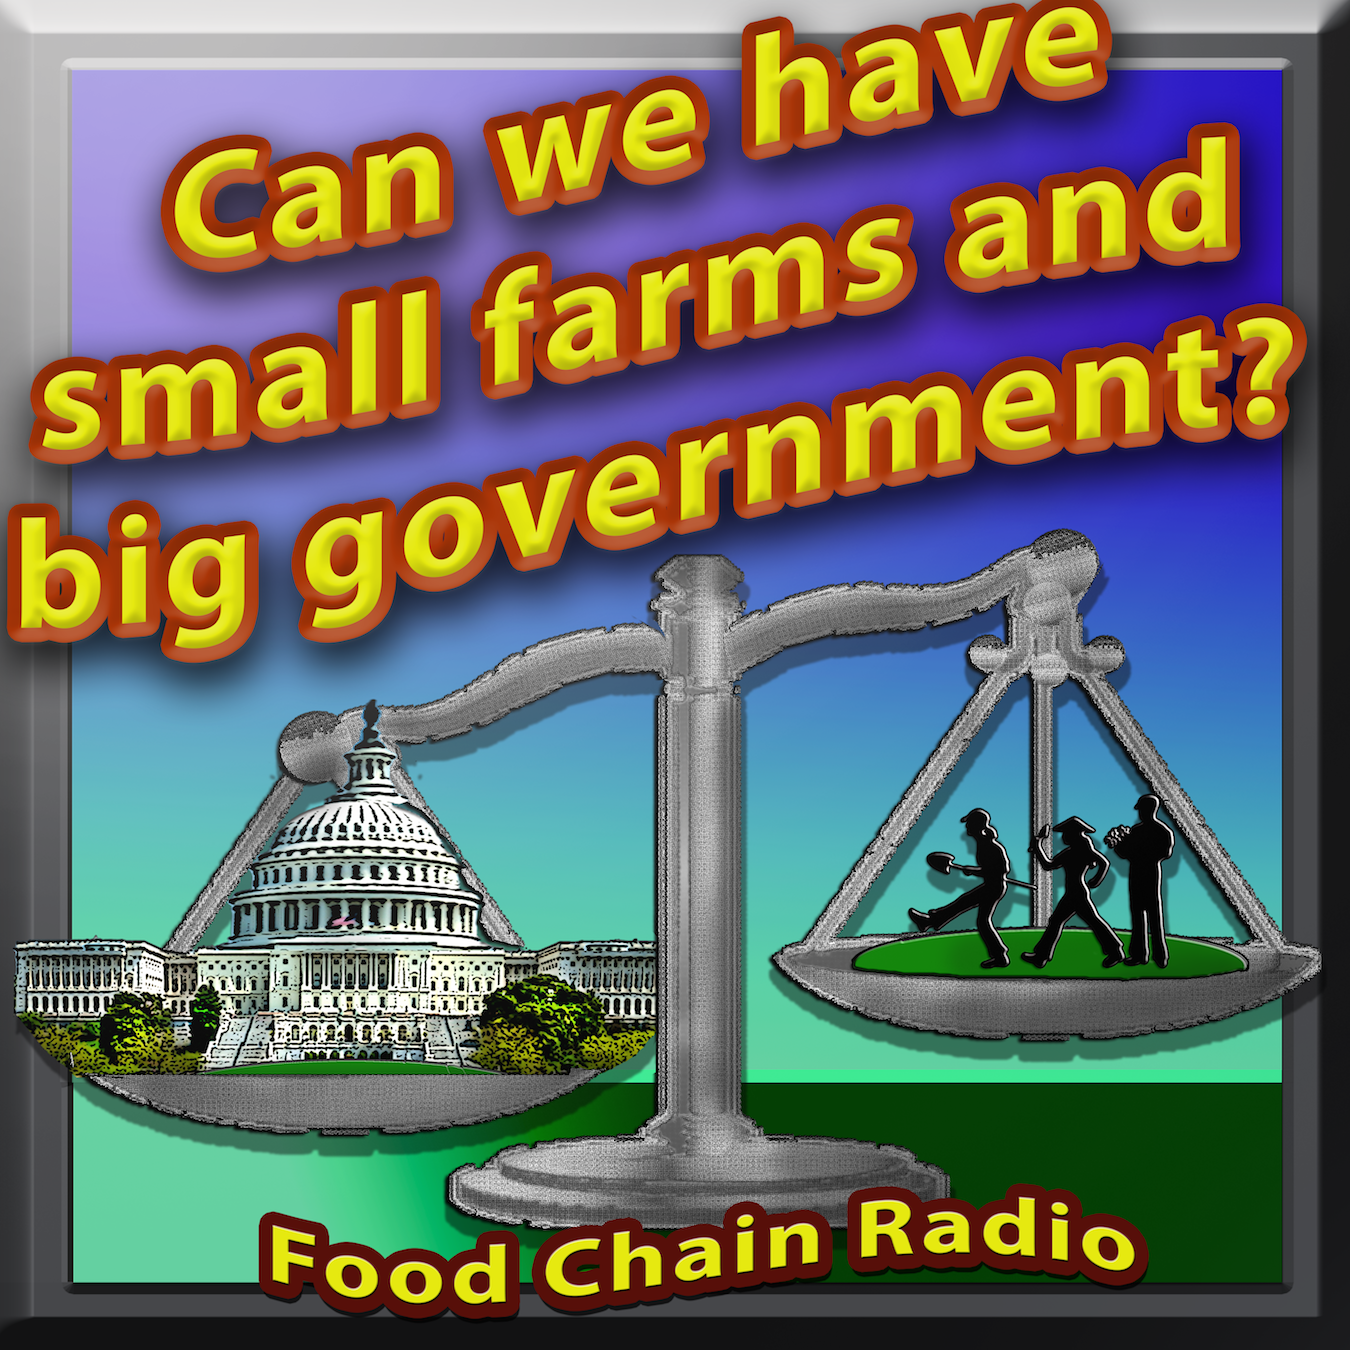 Michael Olson Food Chain Radio – Can we have small farms and big government?